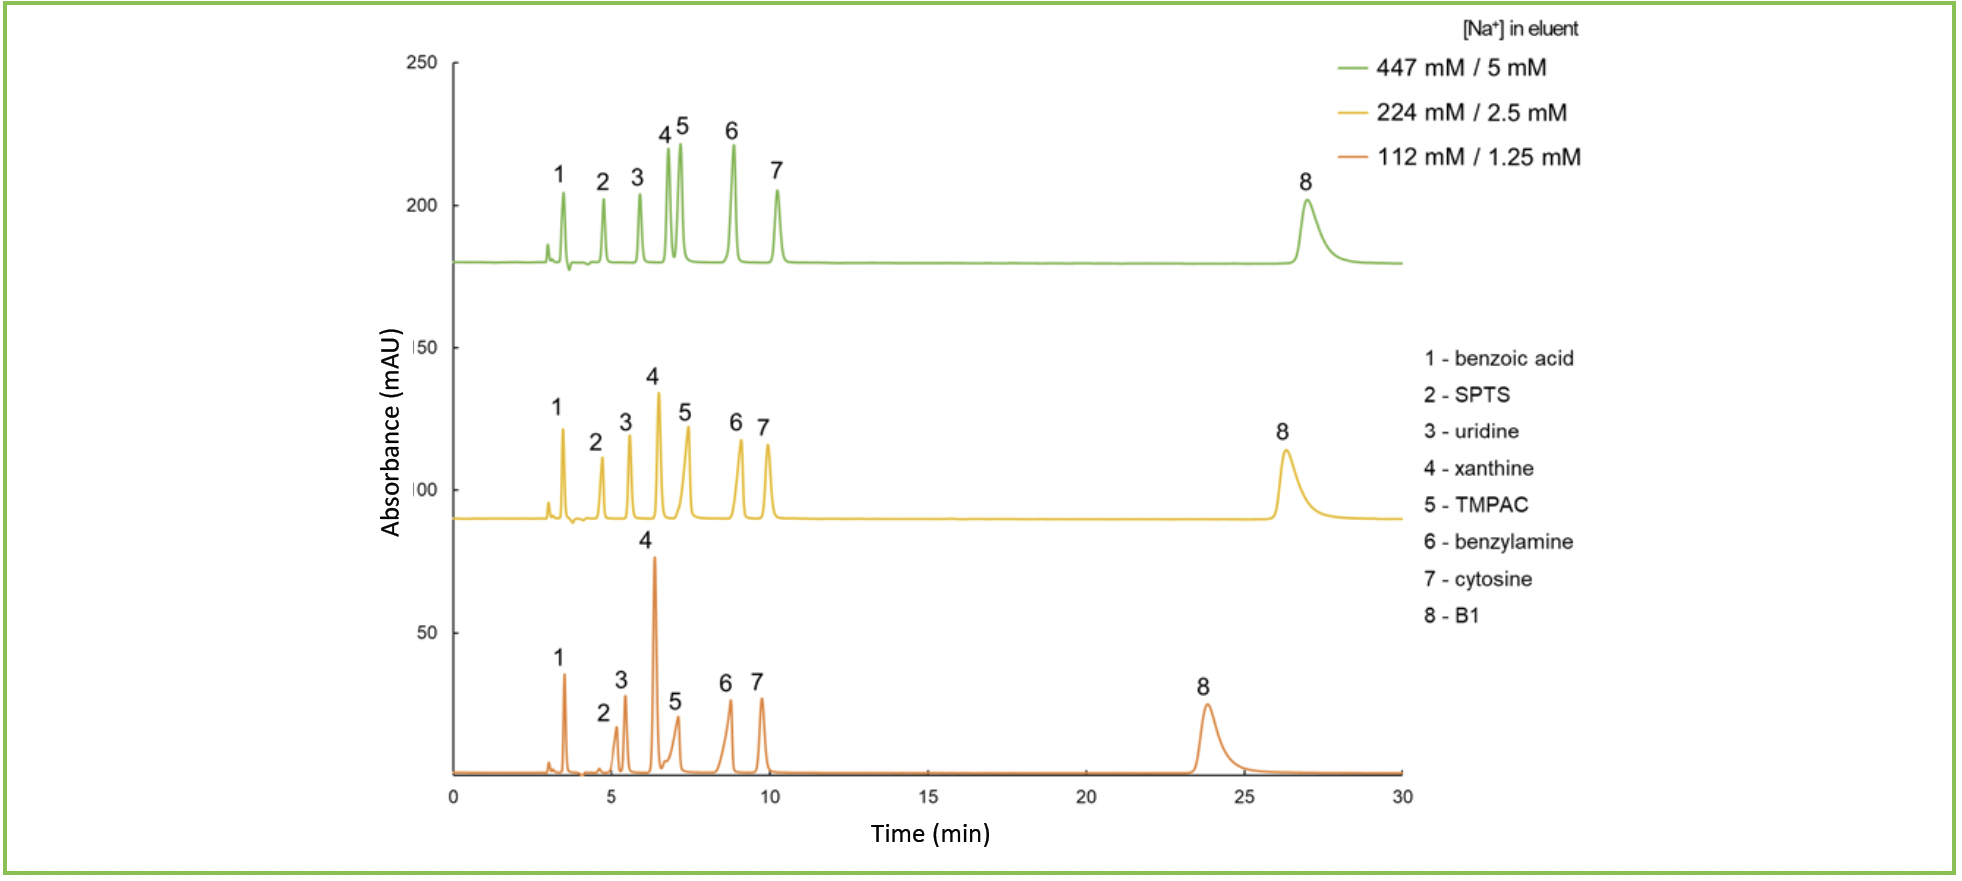 FIGURE 2: Separation of test mixture (Table II) at three buffer concentrations at pH 2.85. Conditions: stationary phase—DIOL 300 (4.6 × 250 mm); mobile phase—sodium formate buffer pH 2.85/acetonitrile 10:90 v/v; concentration of buffer in aqueous portion: 112 mM (orange line); 224 mM (yellow line); 447 mM (green line); flow rate: 1 mL/min; UV detection at 254 nm.